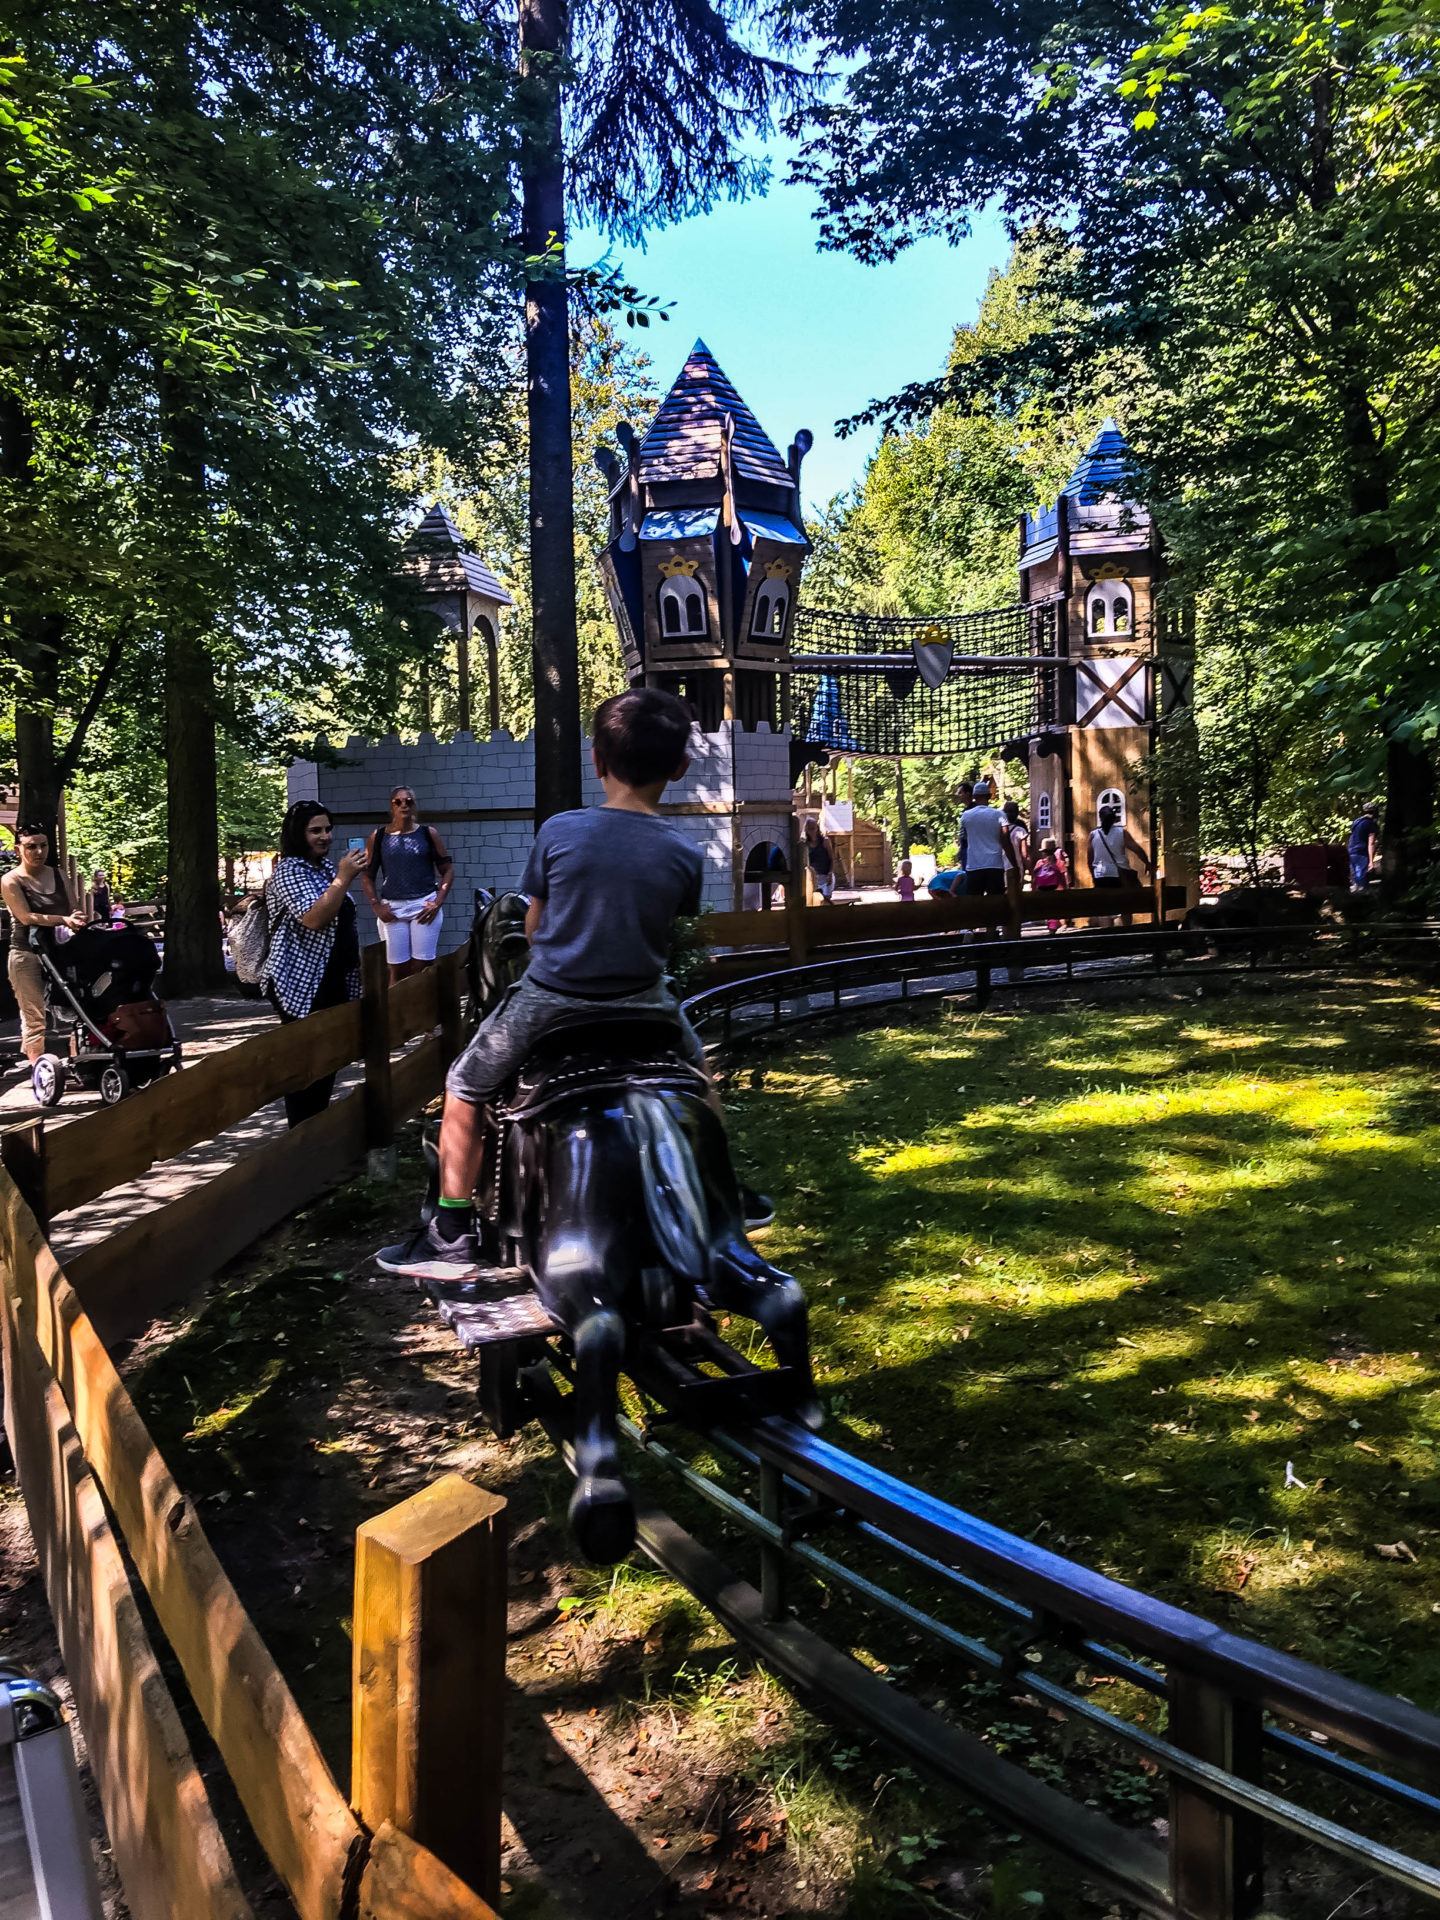 The little mechanical horse ride in the trees at Märchen-Paradies.